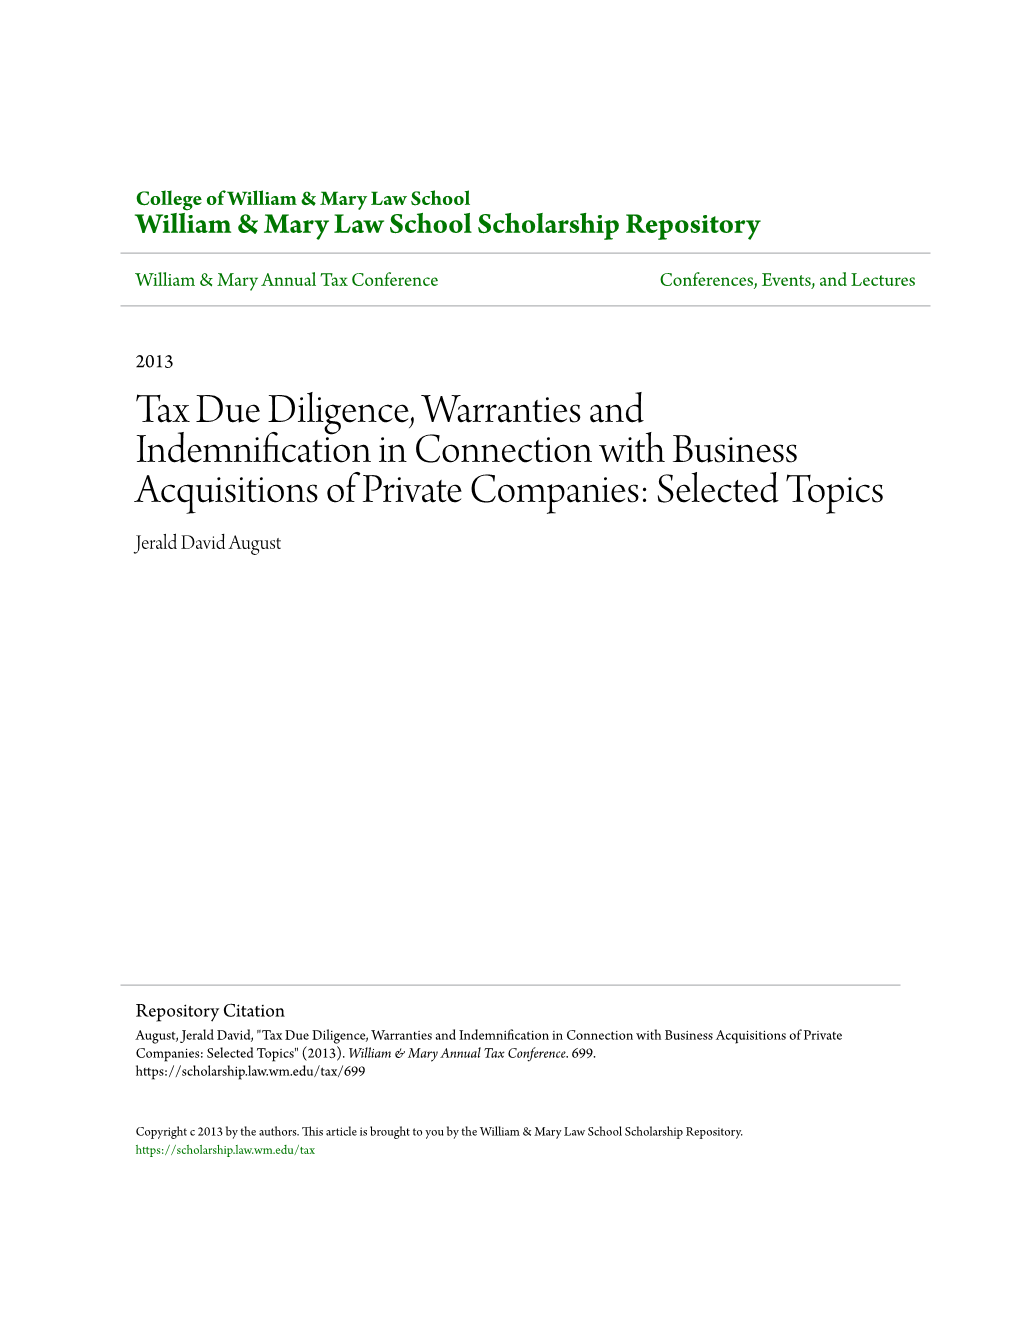 Tax Due Diligence, Warranties and Indemnification in Connection with Business Acquisitions of Private Companies: Selected Topics Jerald David August